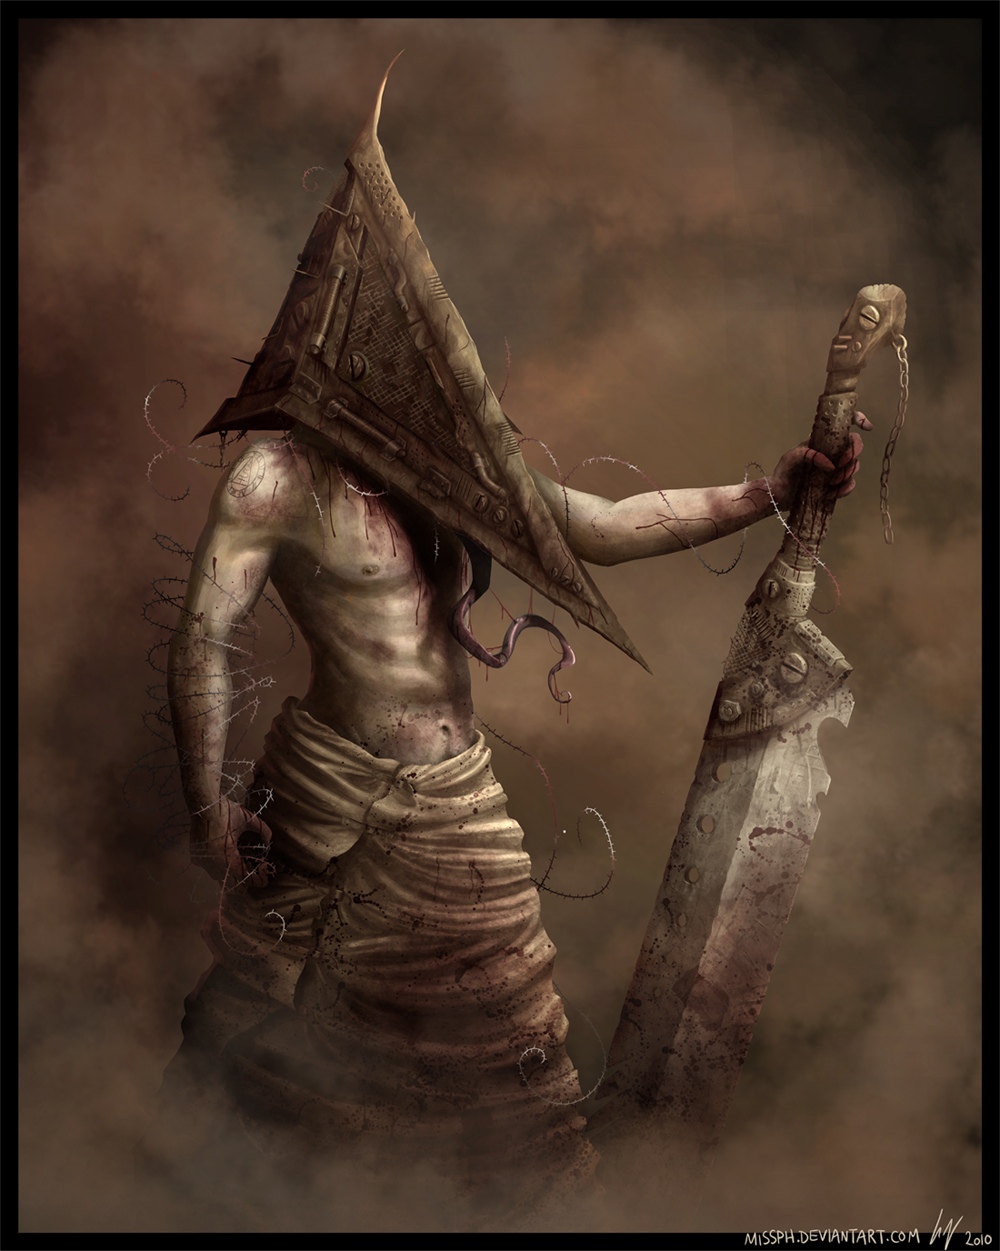 That Red Pyramid Thing